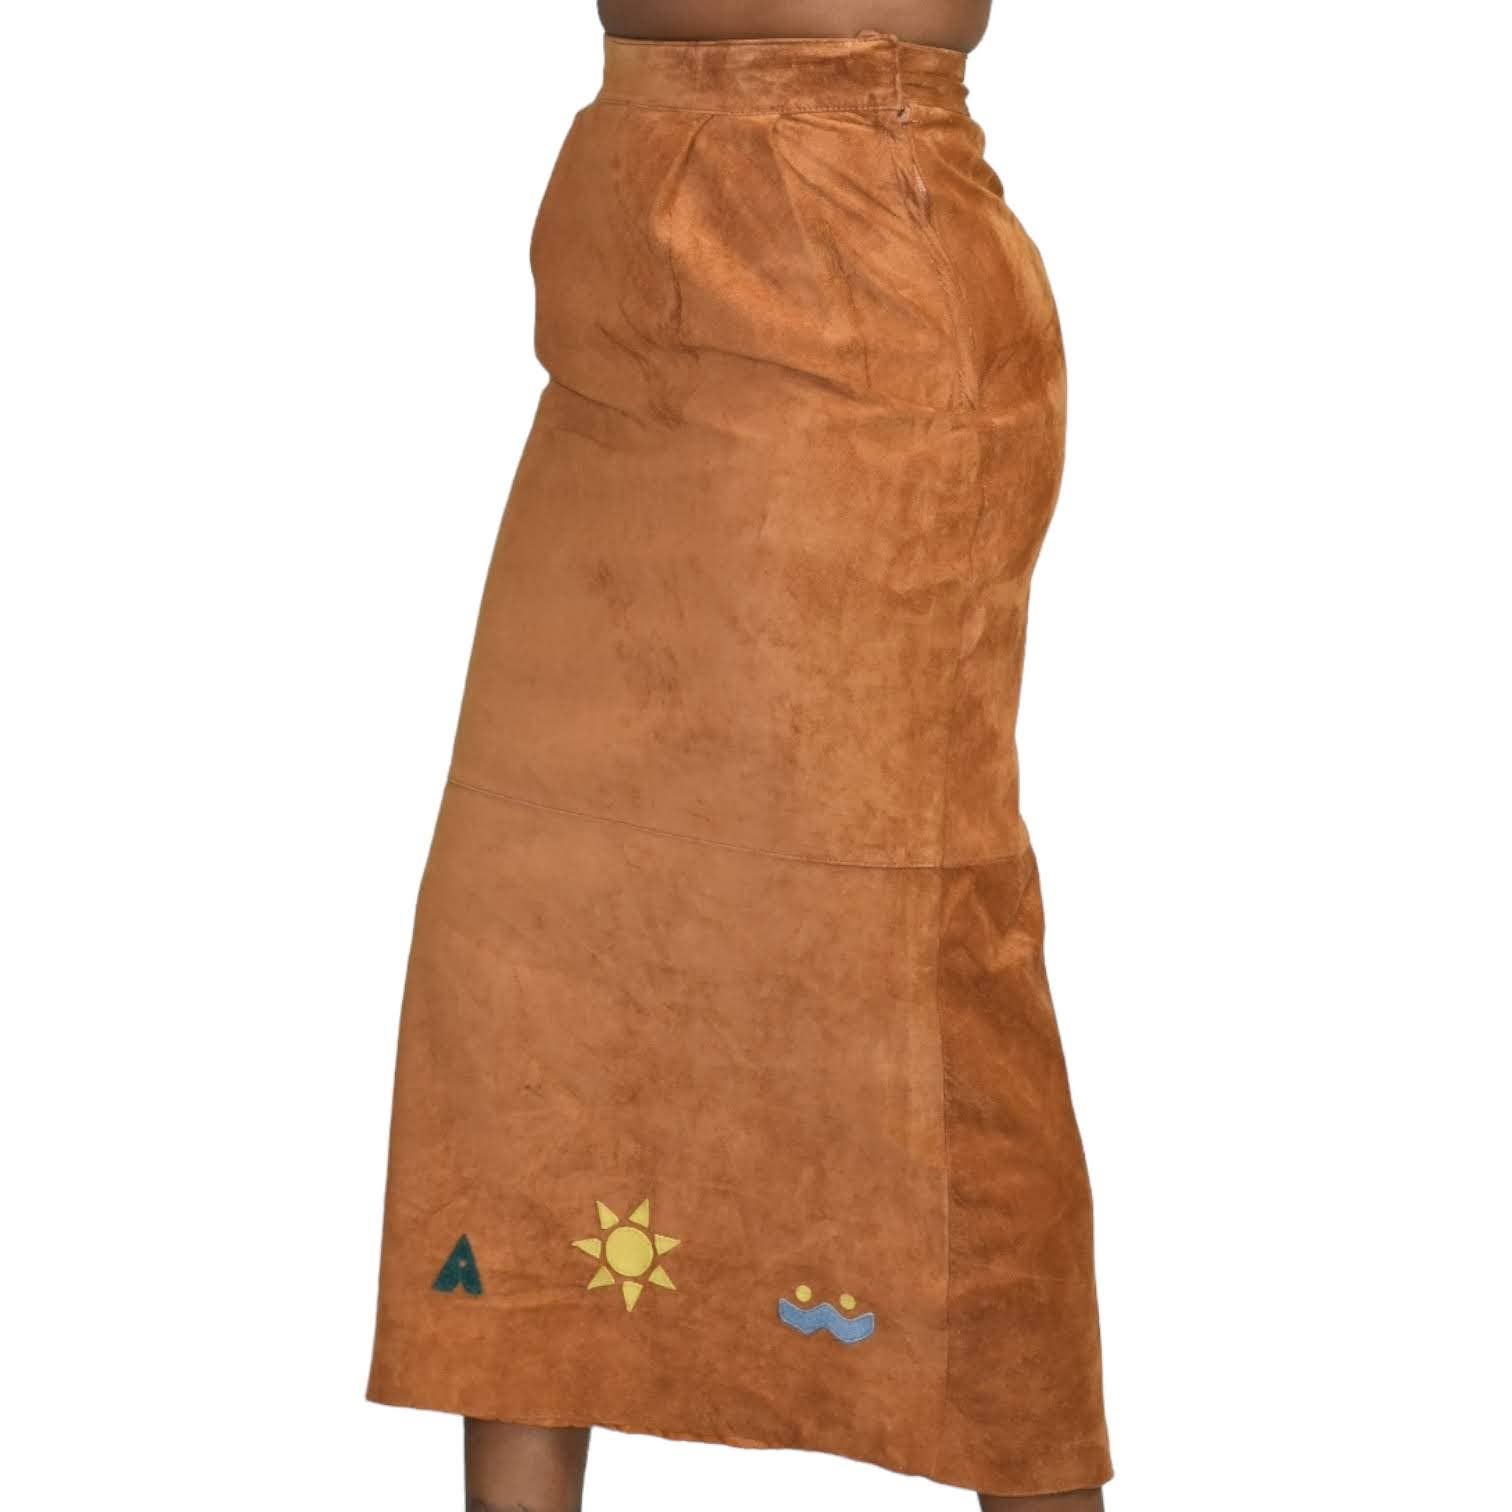 Eagles Eye Suede Skirt Embroidered Vintage Straight Column Midi Tribal Leather Brown Camel Size 2 XS